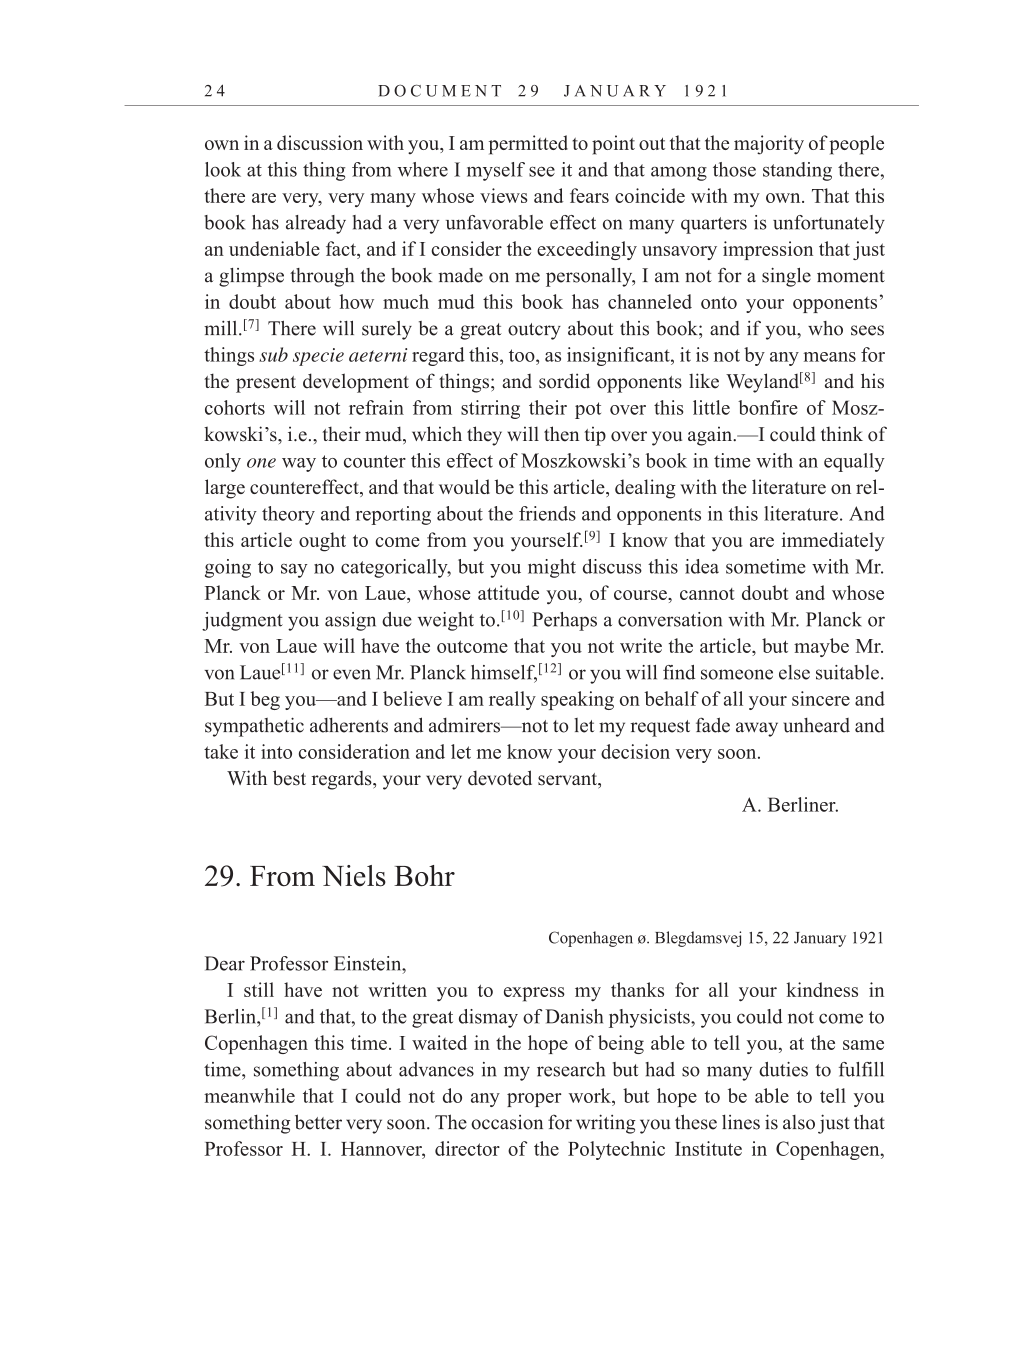 Volume 12: The Berlin Years: Correspondence, January-December 1921 (English translation supplement) page 24